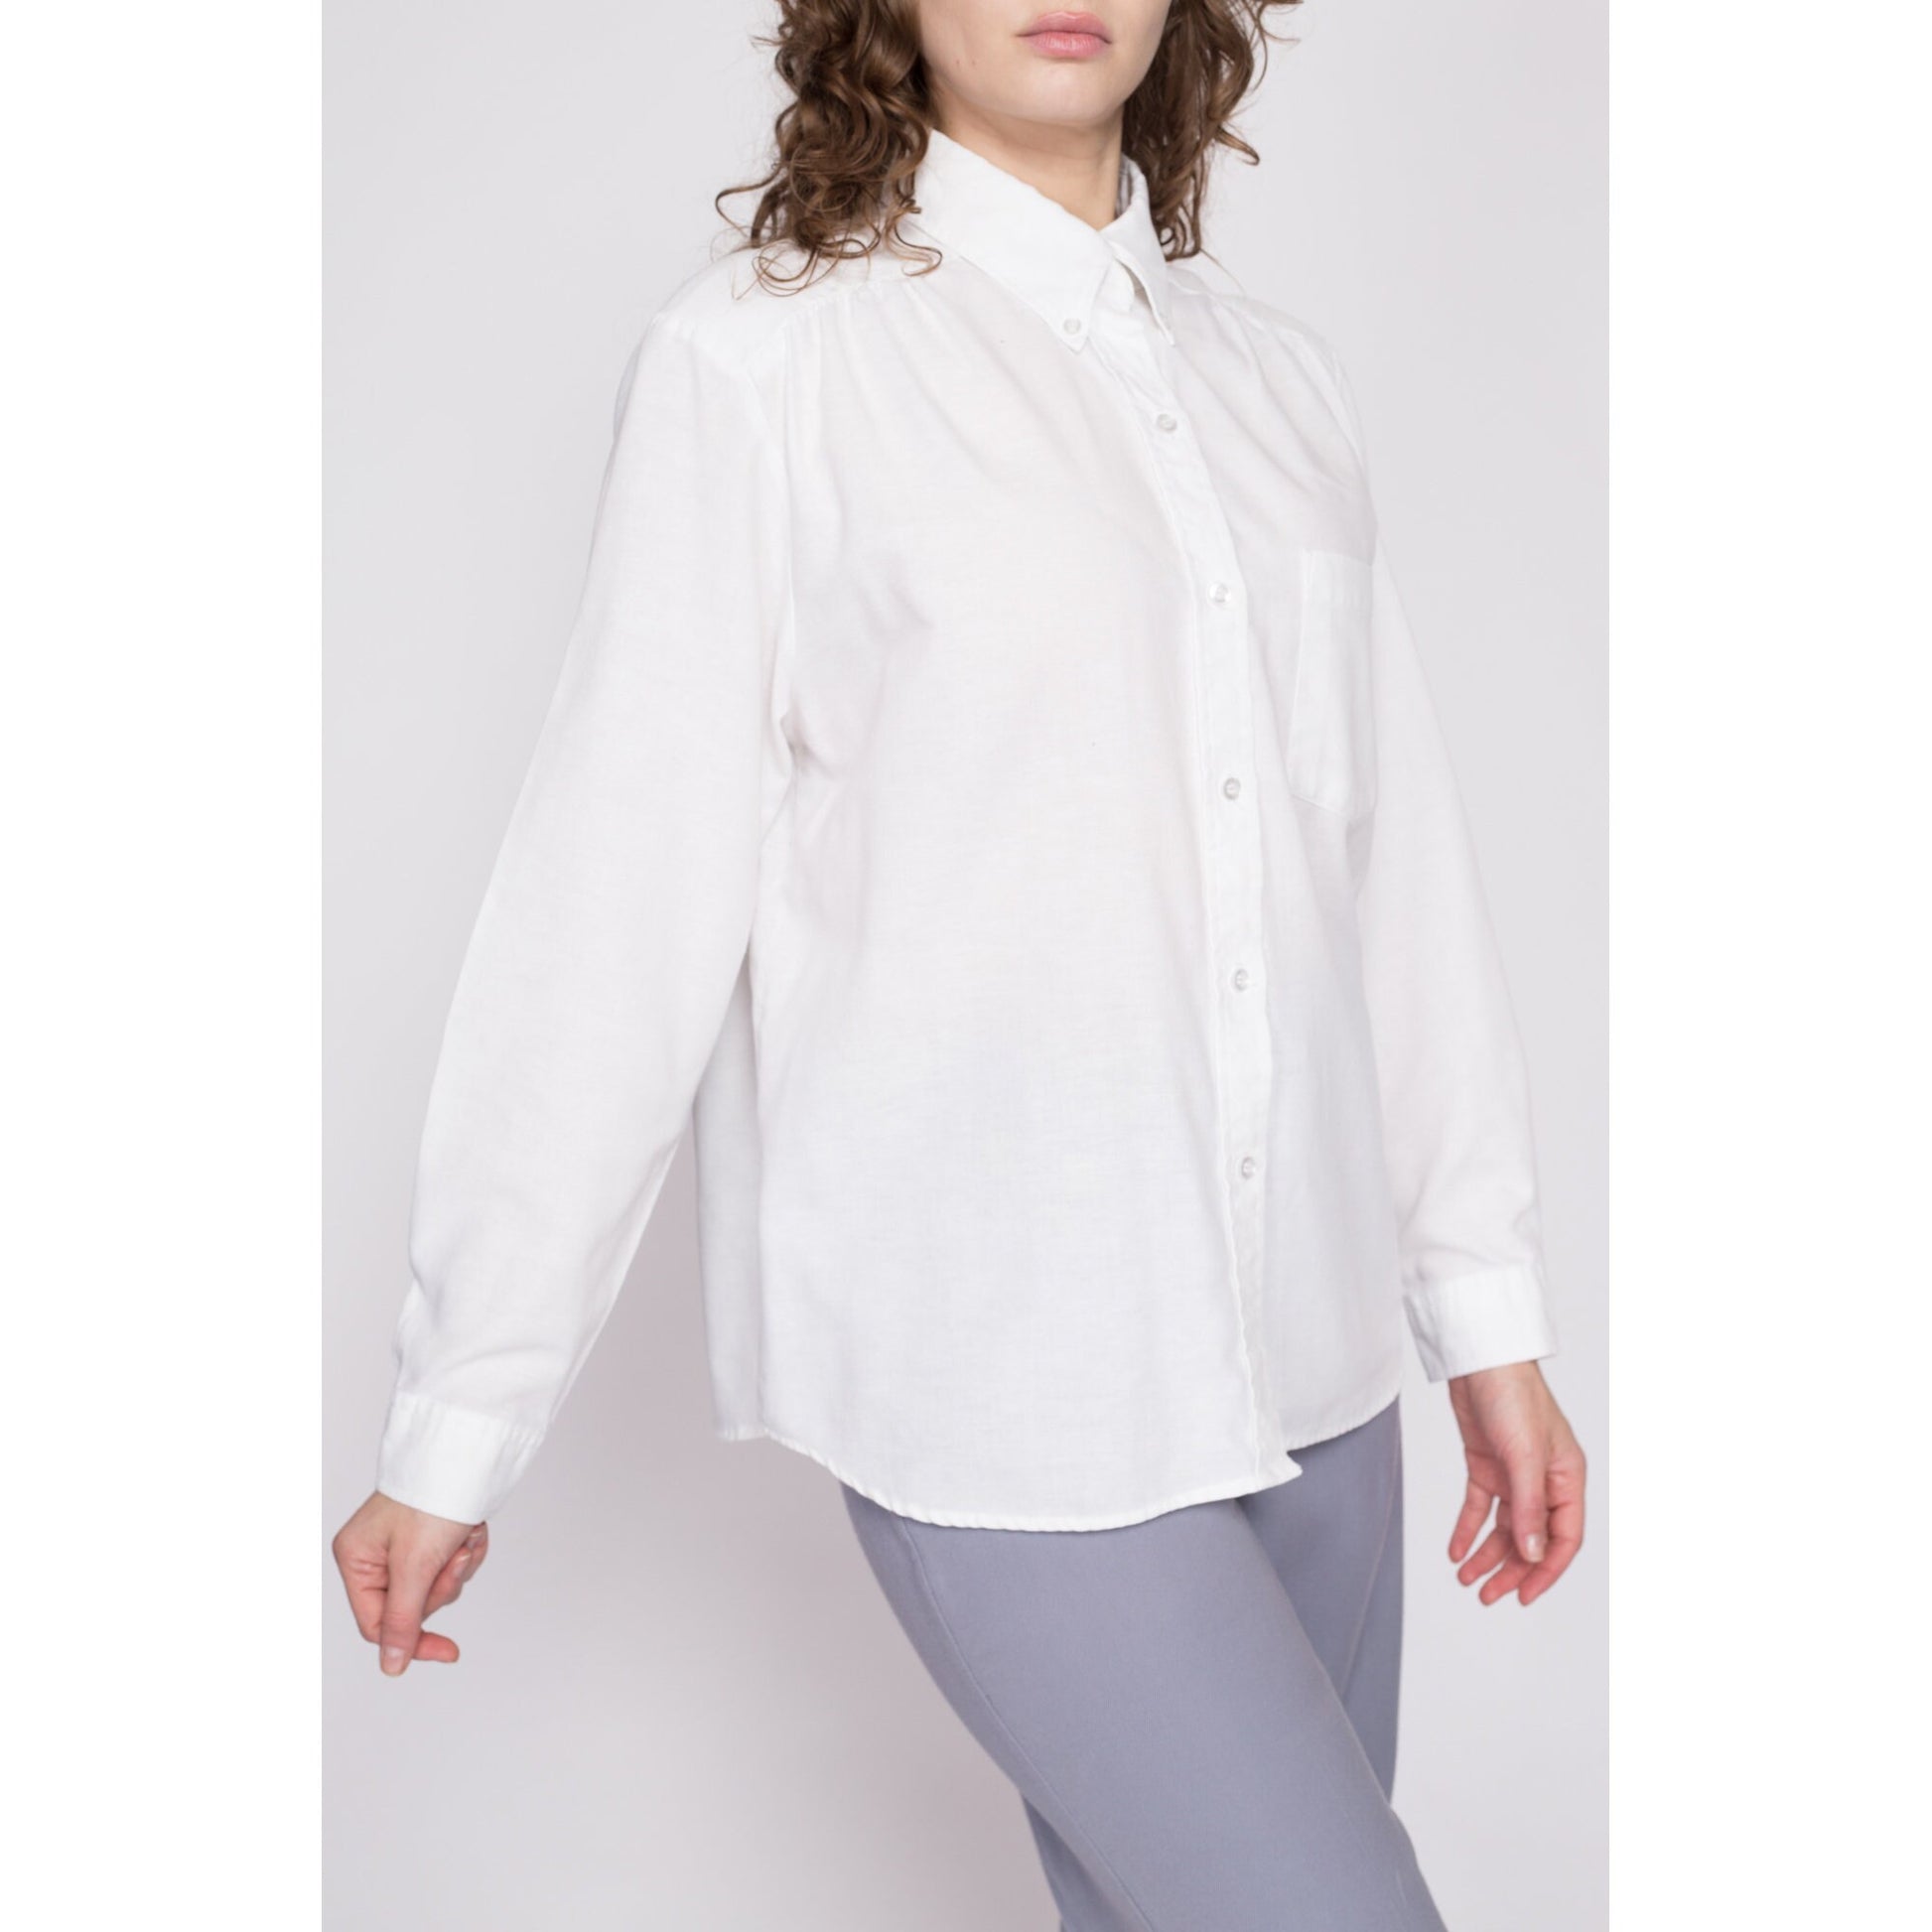 80s Minimalist White Button Up Shirt - Extra Large | Vintage Cotton Blend Long Sleeve Collared Top